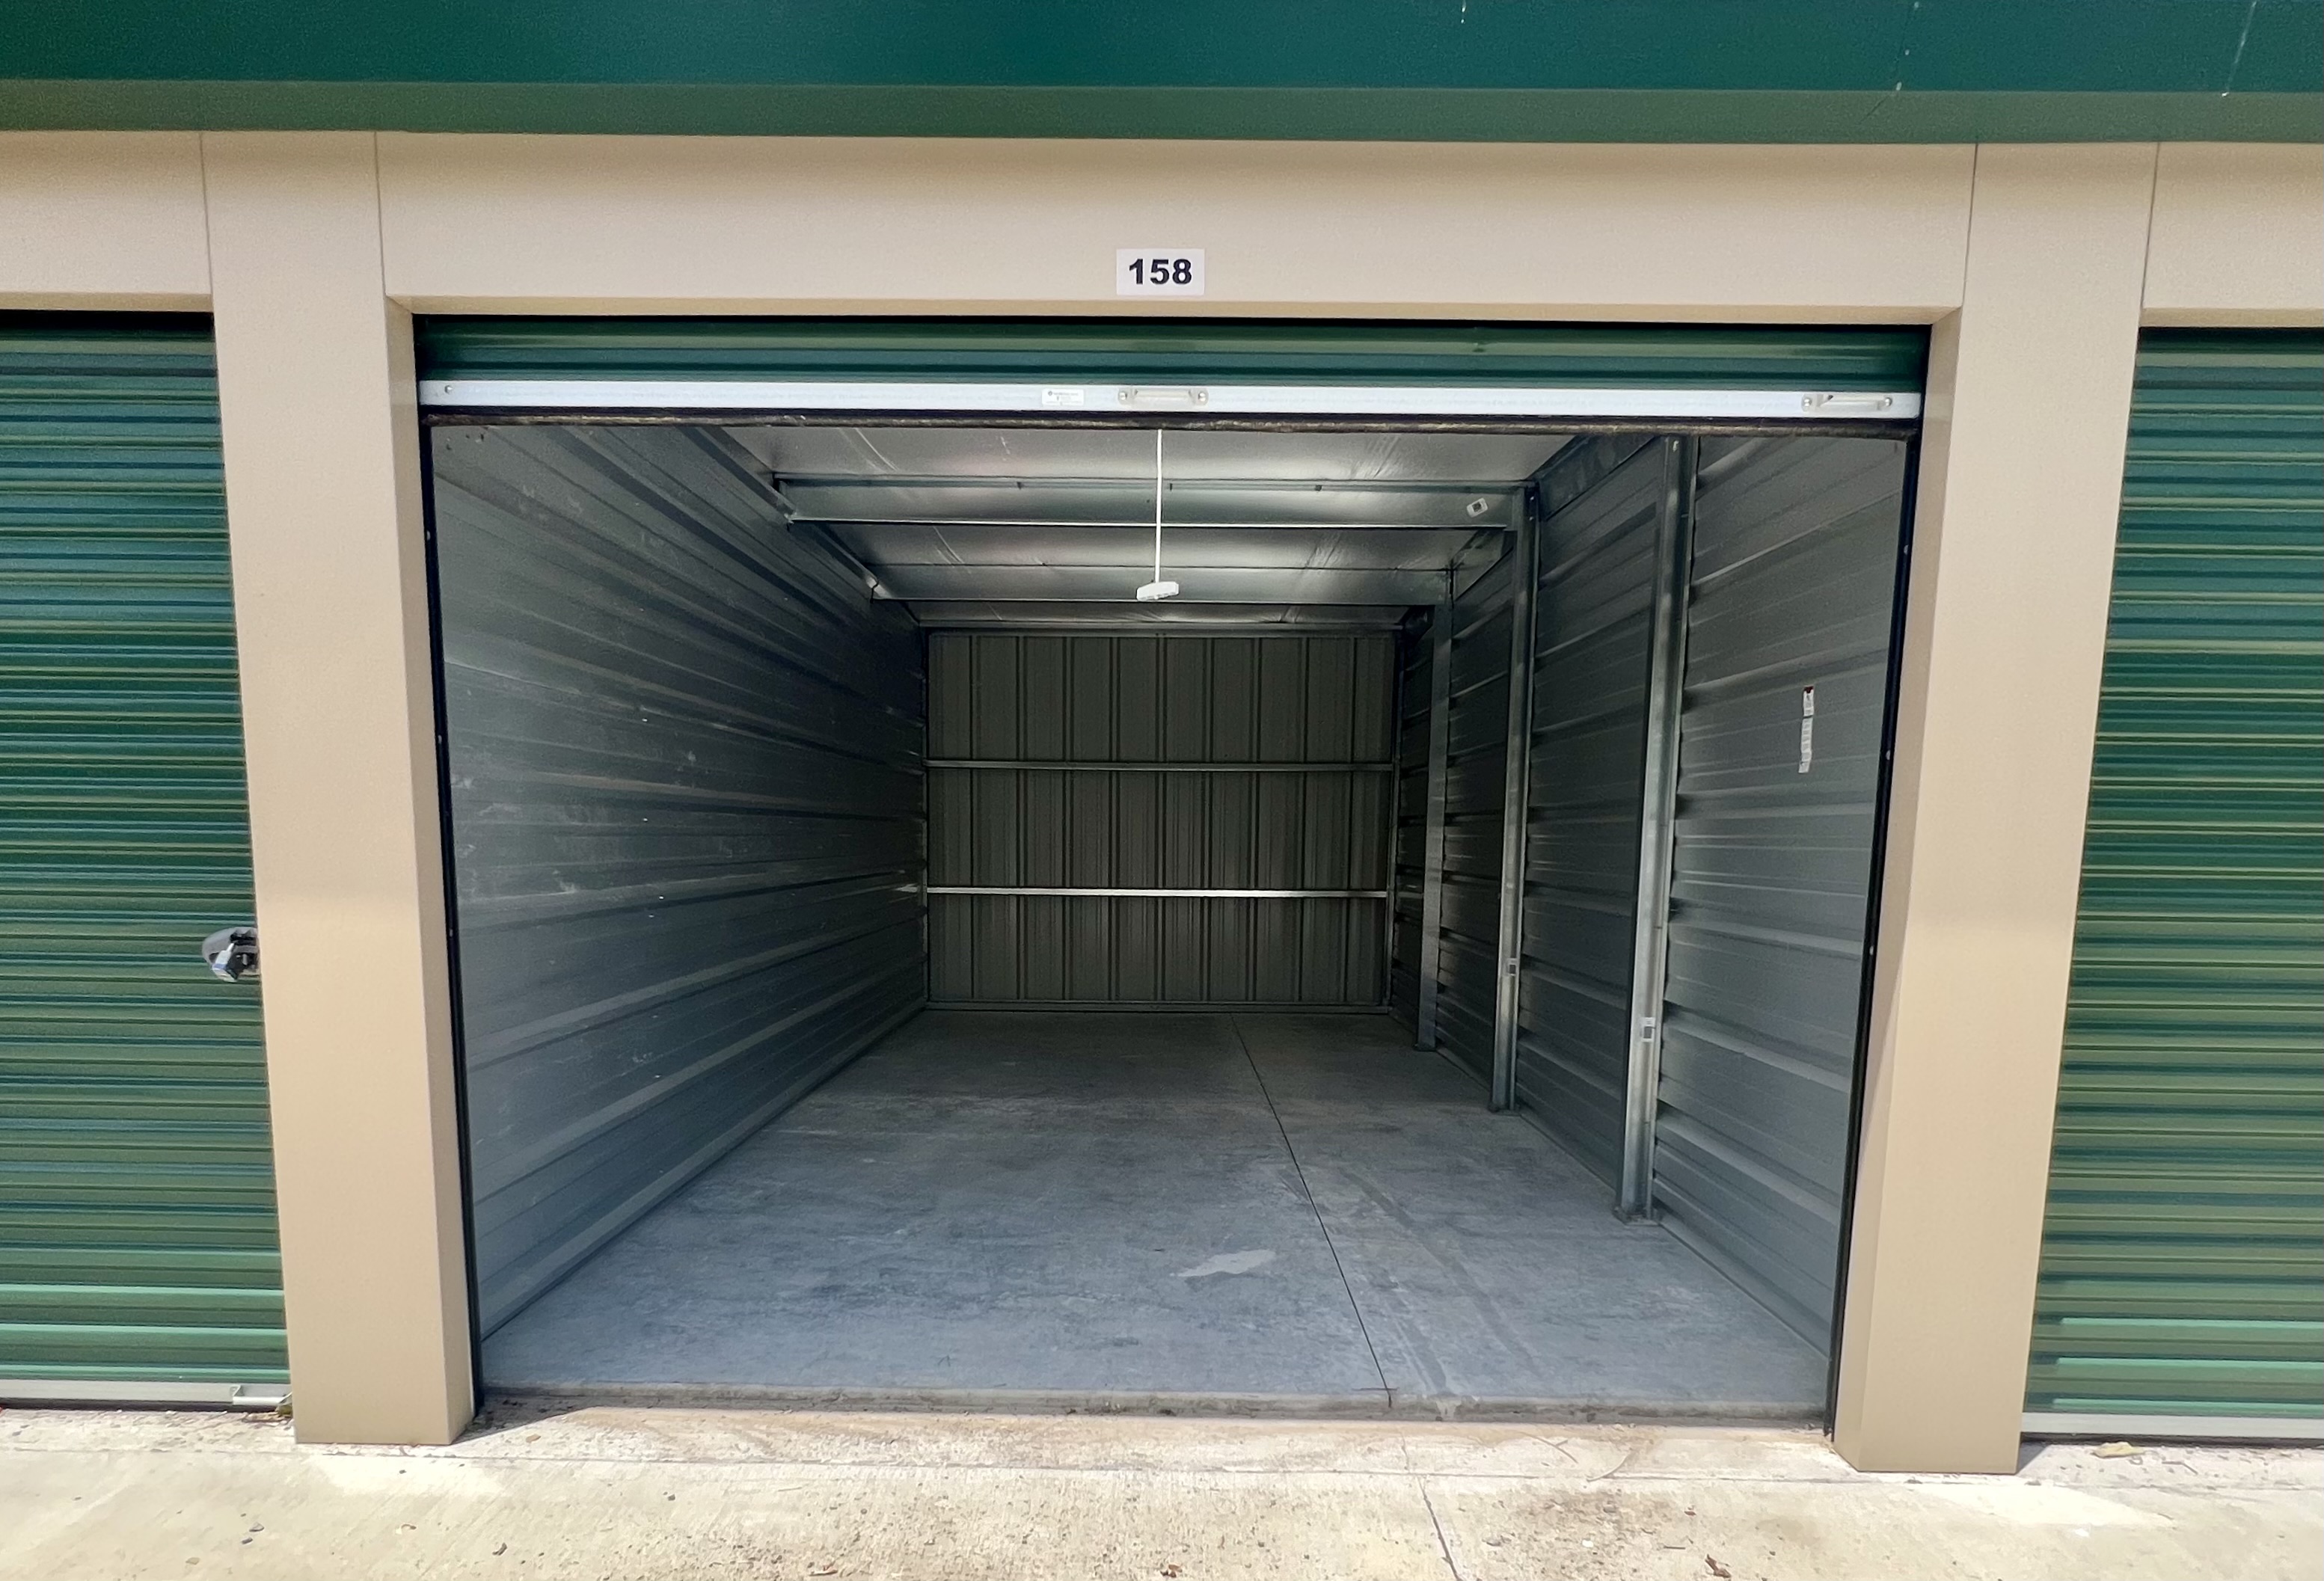 Trusted Choice Storage - Hermitage Rd Open Unit